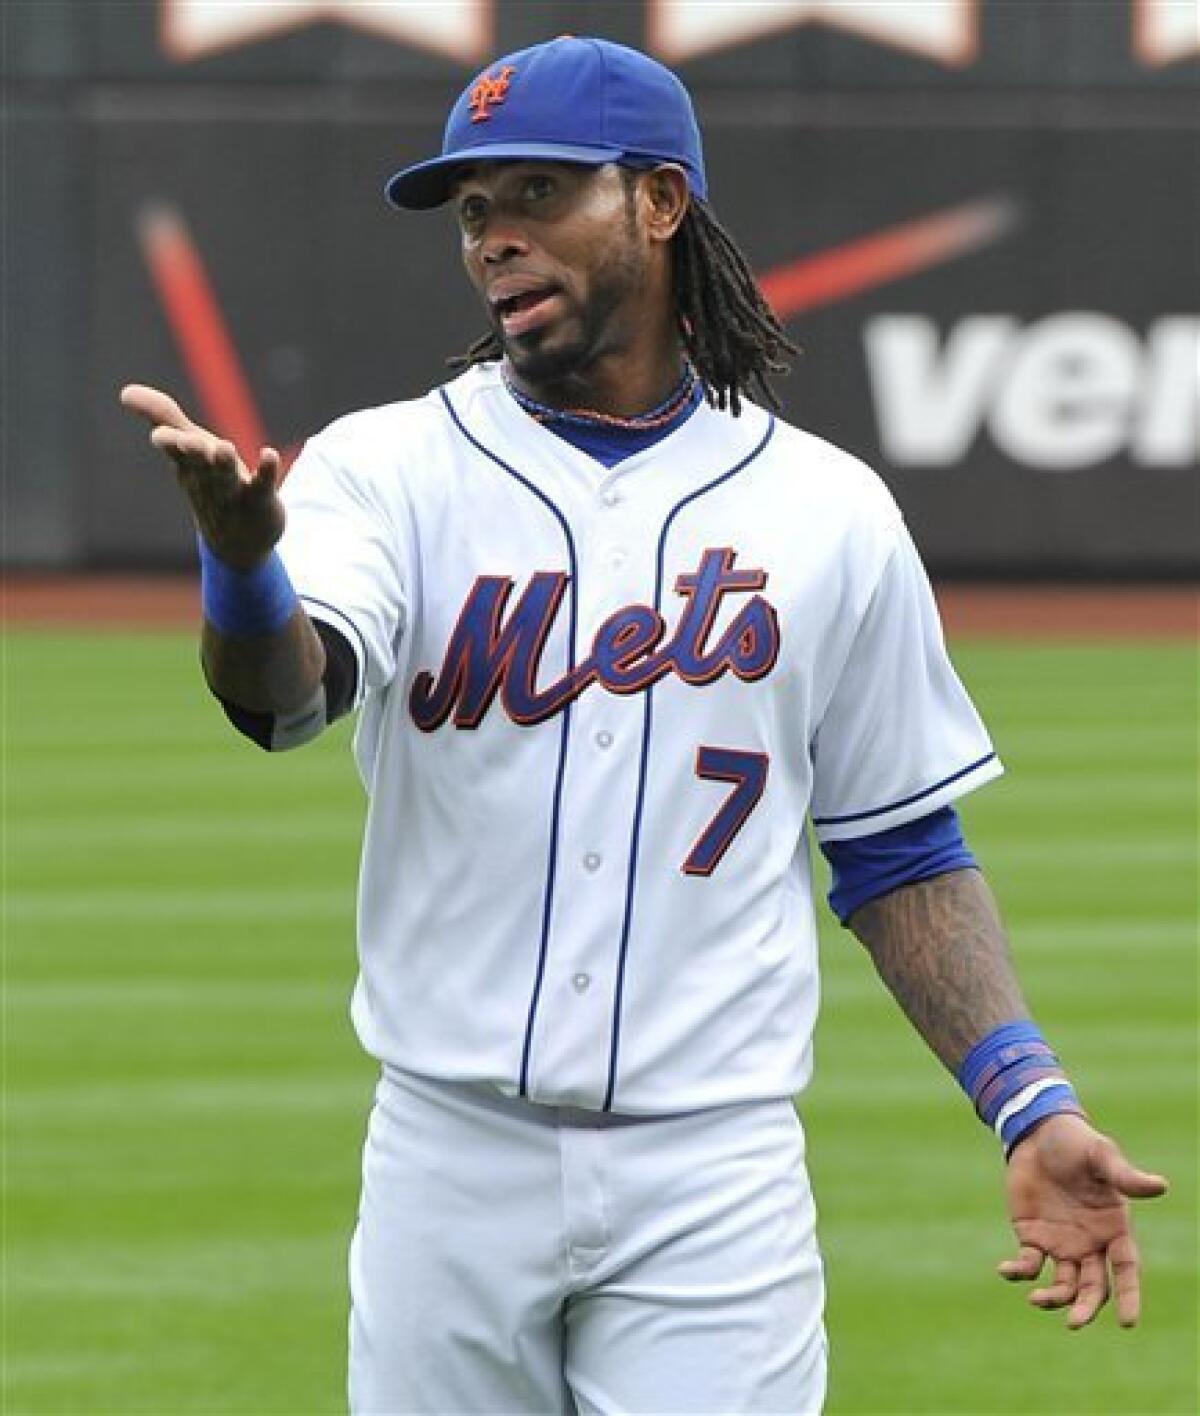 NY Mets not likely to push for Hanley Ramirez after Red Sox release